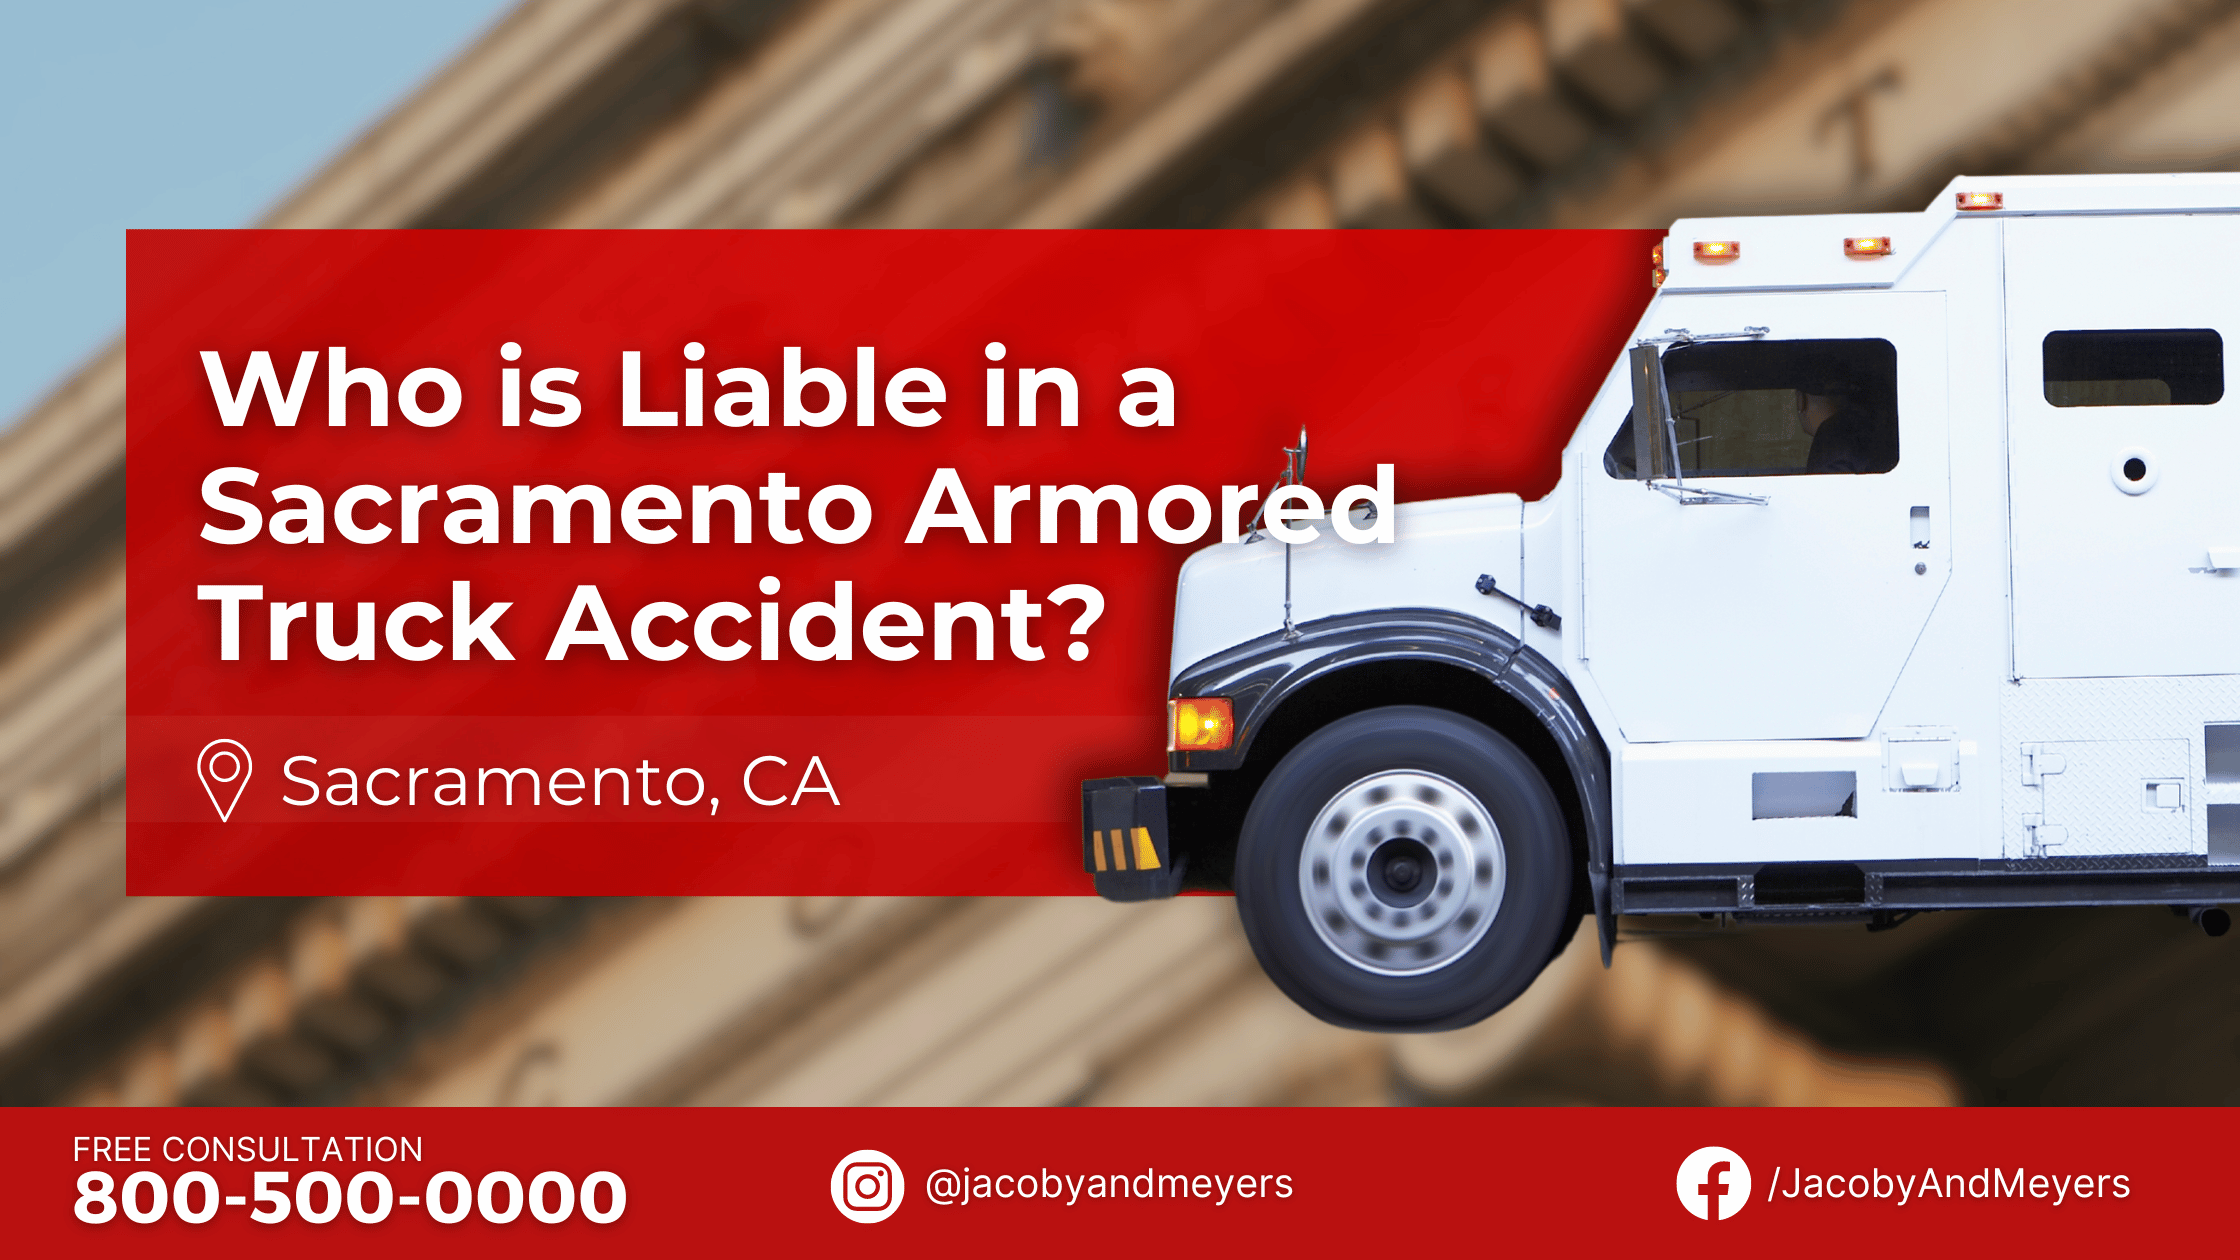 Who is Liable in a Sacramento Armored Truck Accident?